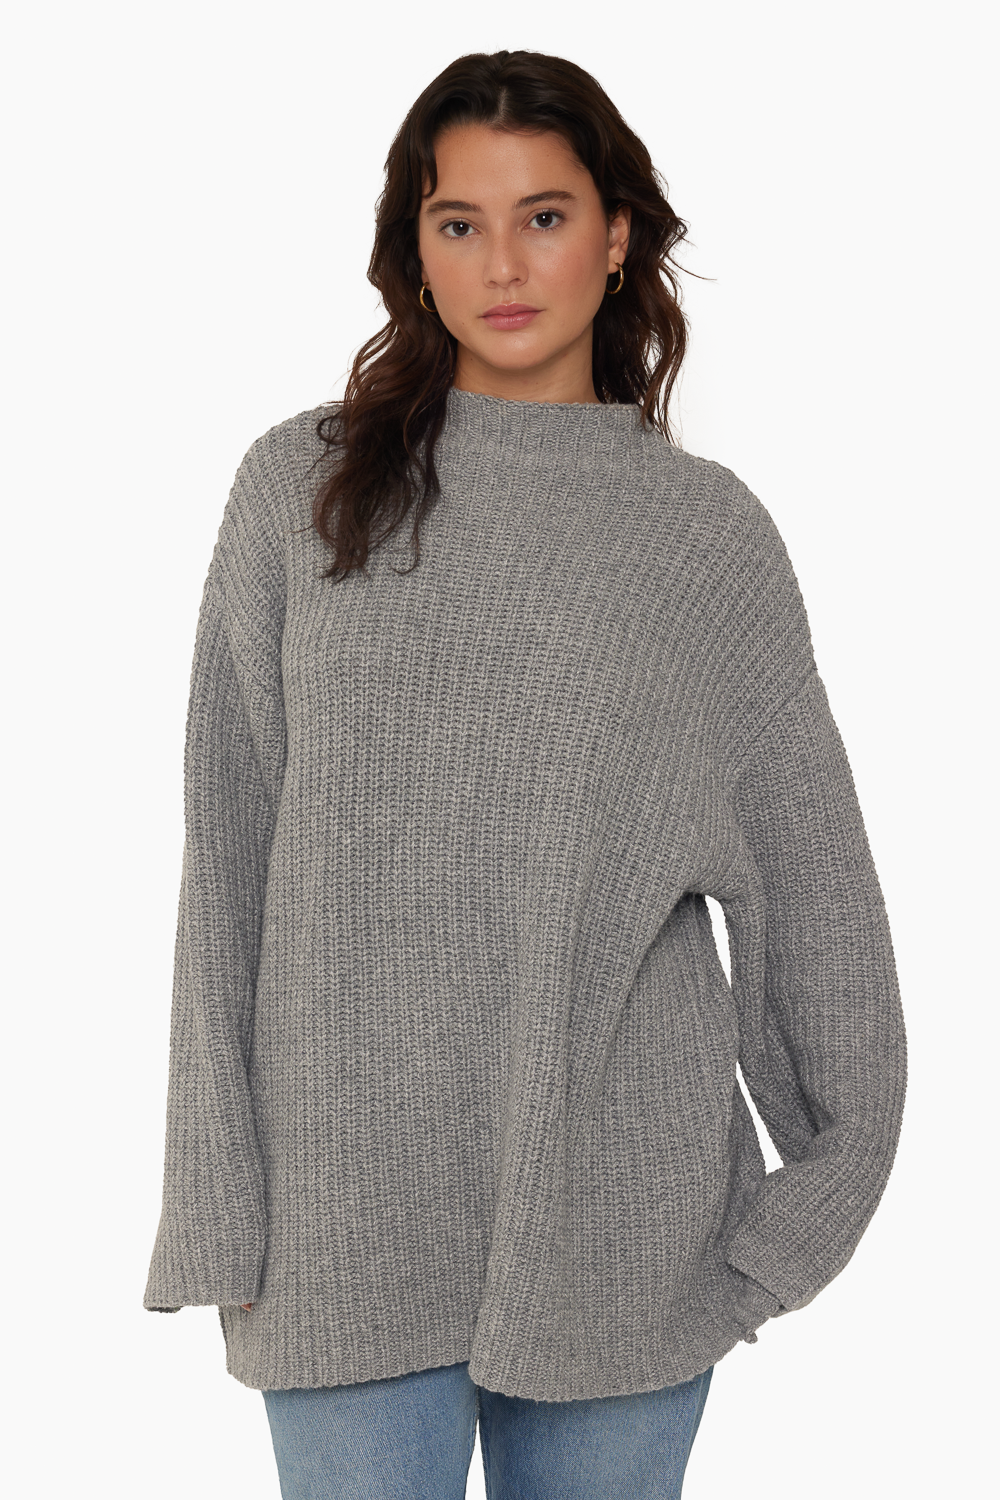 SET™ MOCK NECK SWEATER IN MARBLE